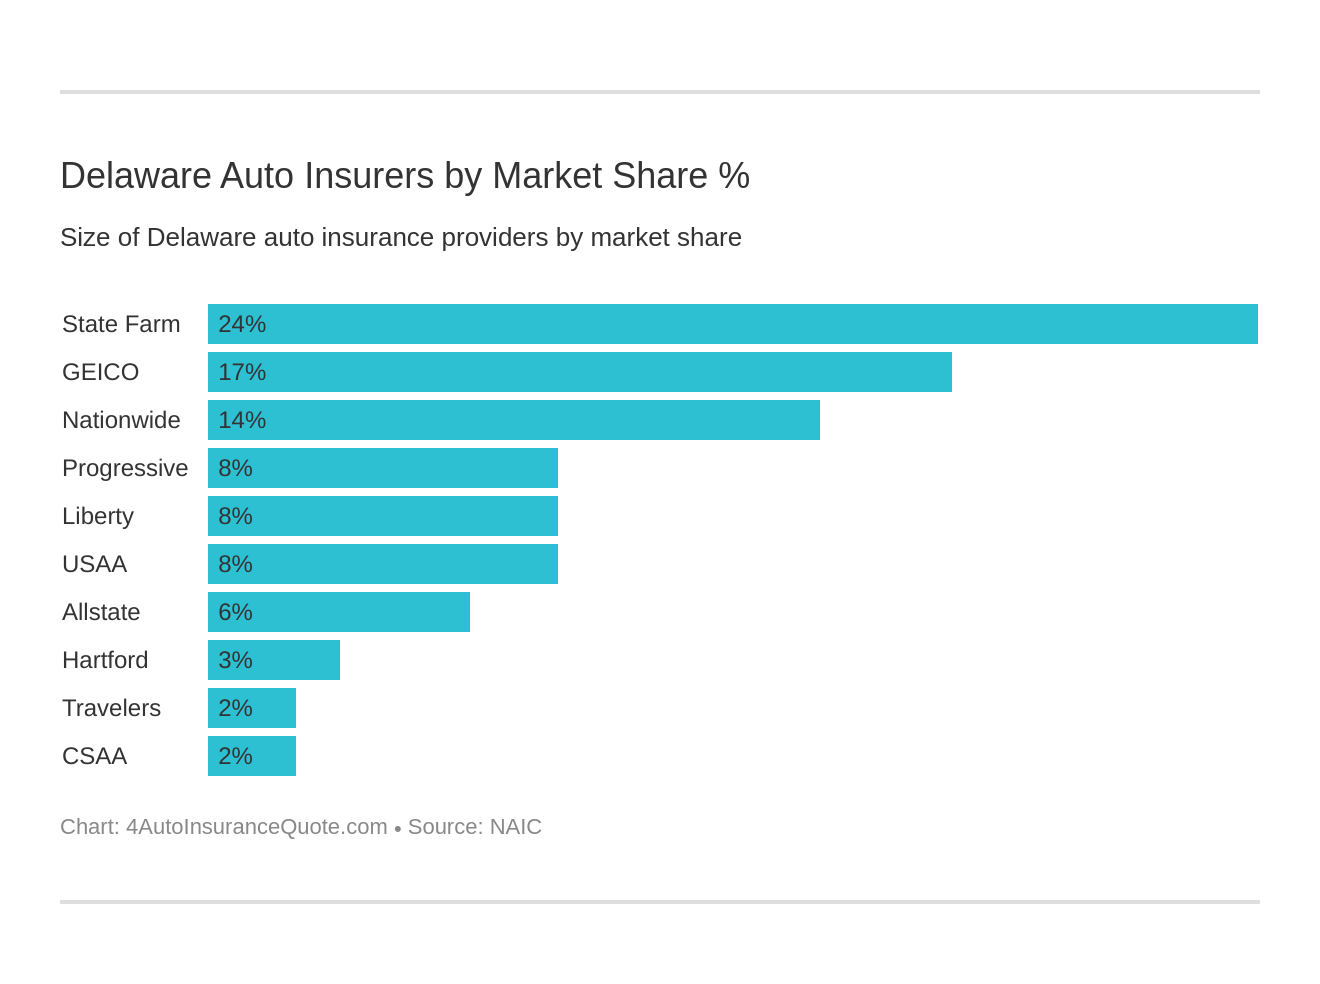 Delaware Auto Insurers by Market Share %